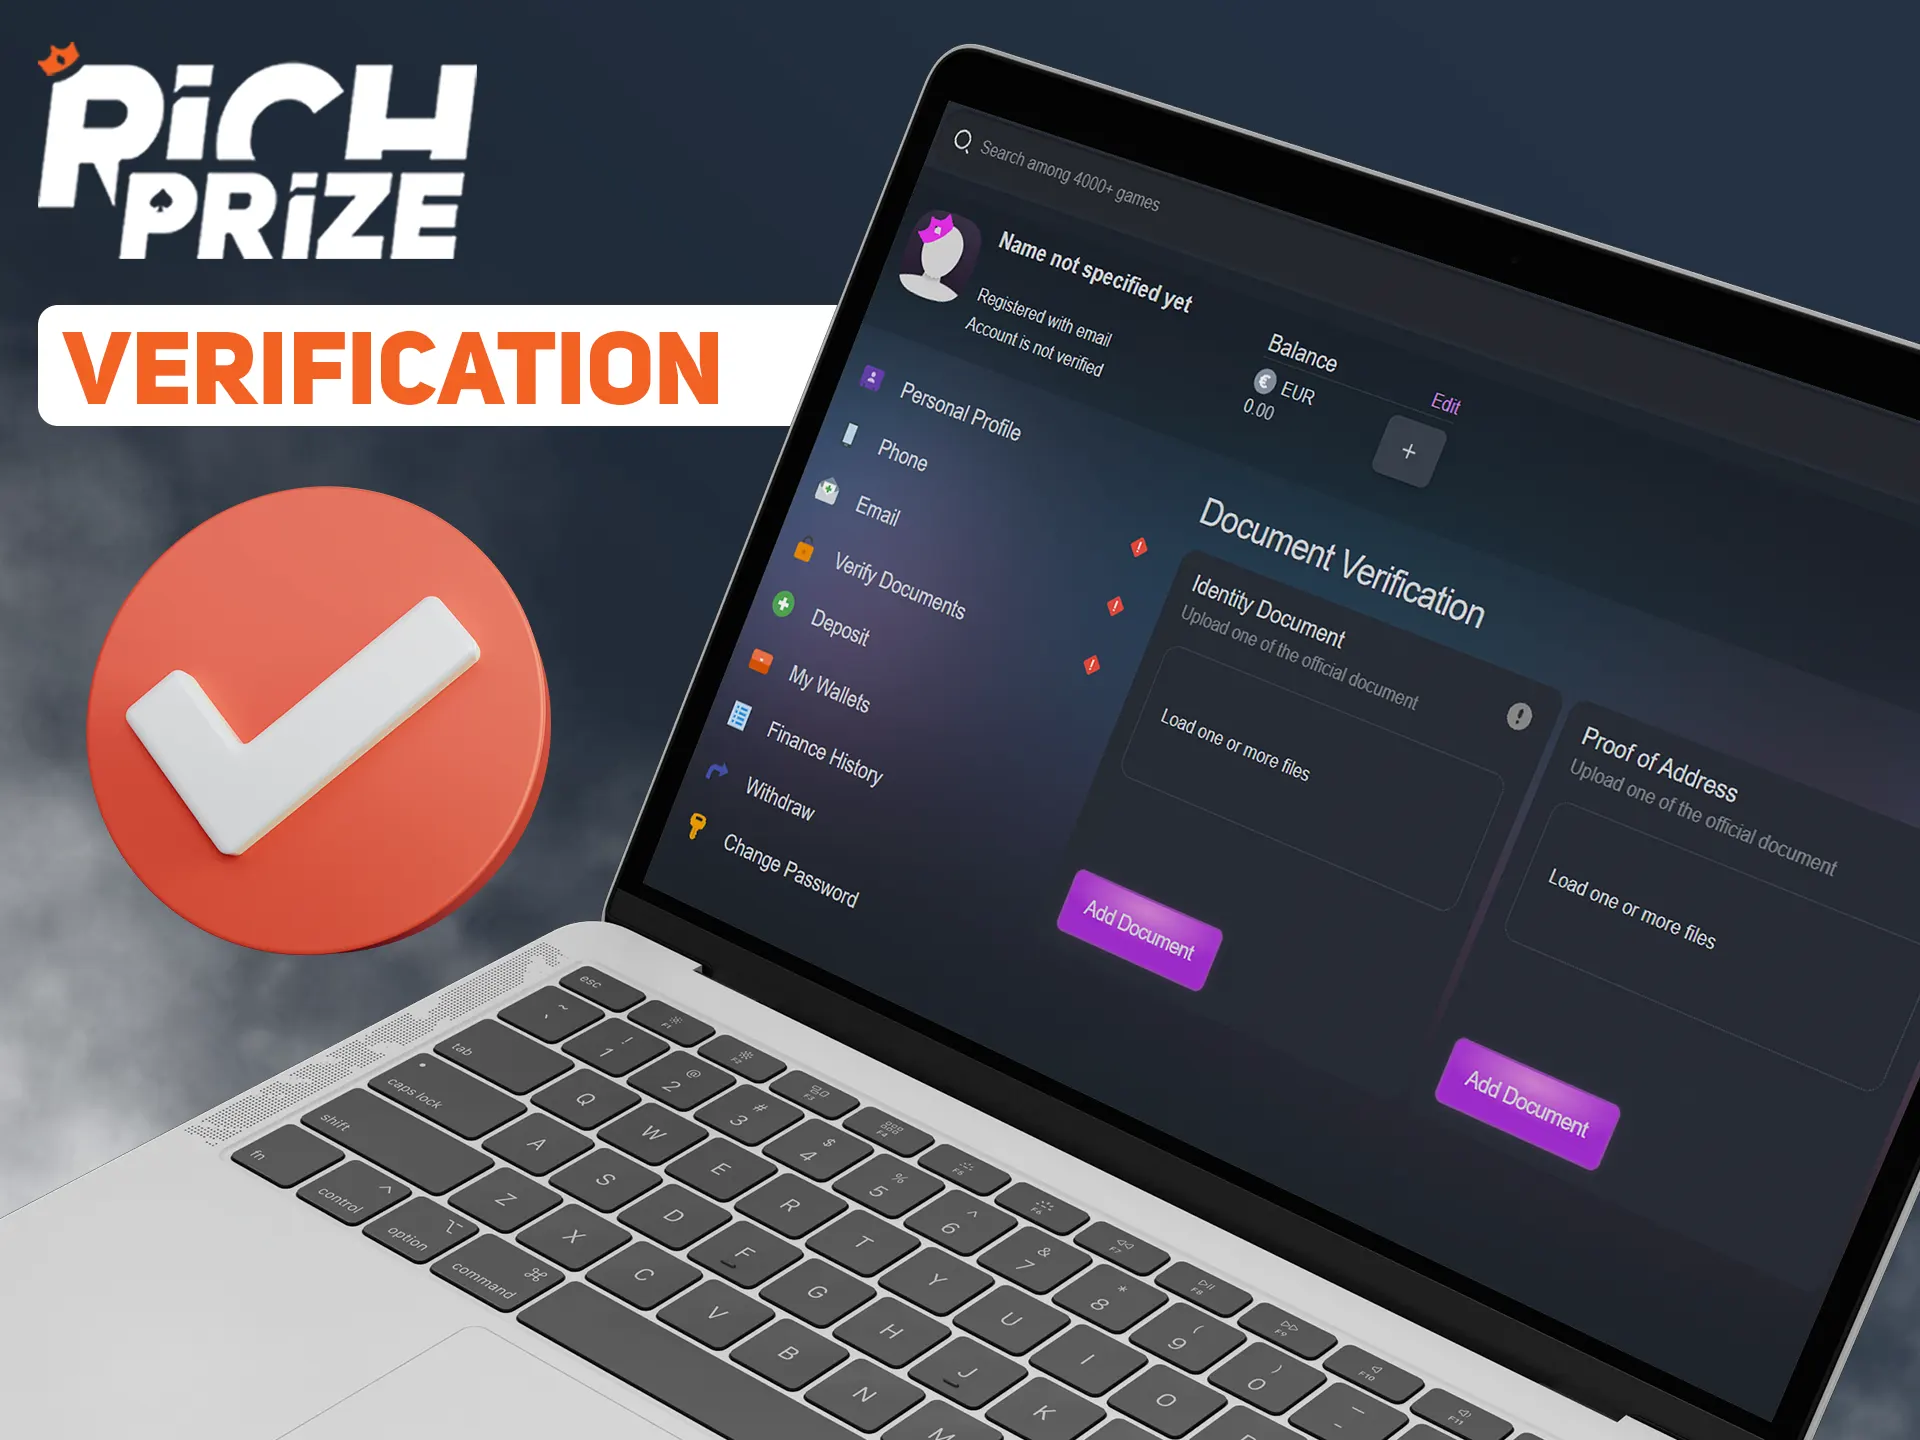 Verify your Richprize account for unlocking new features.